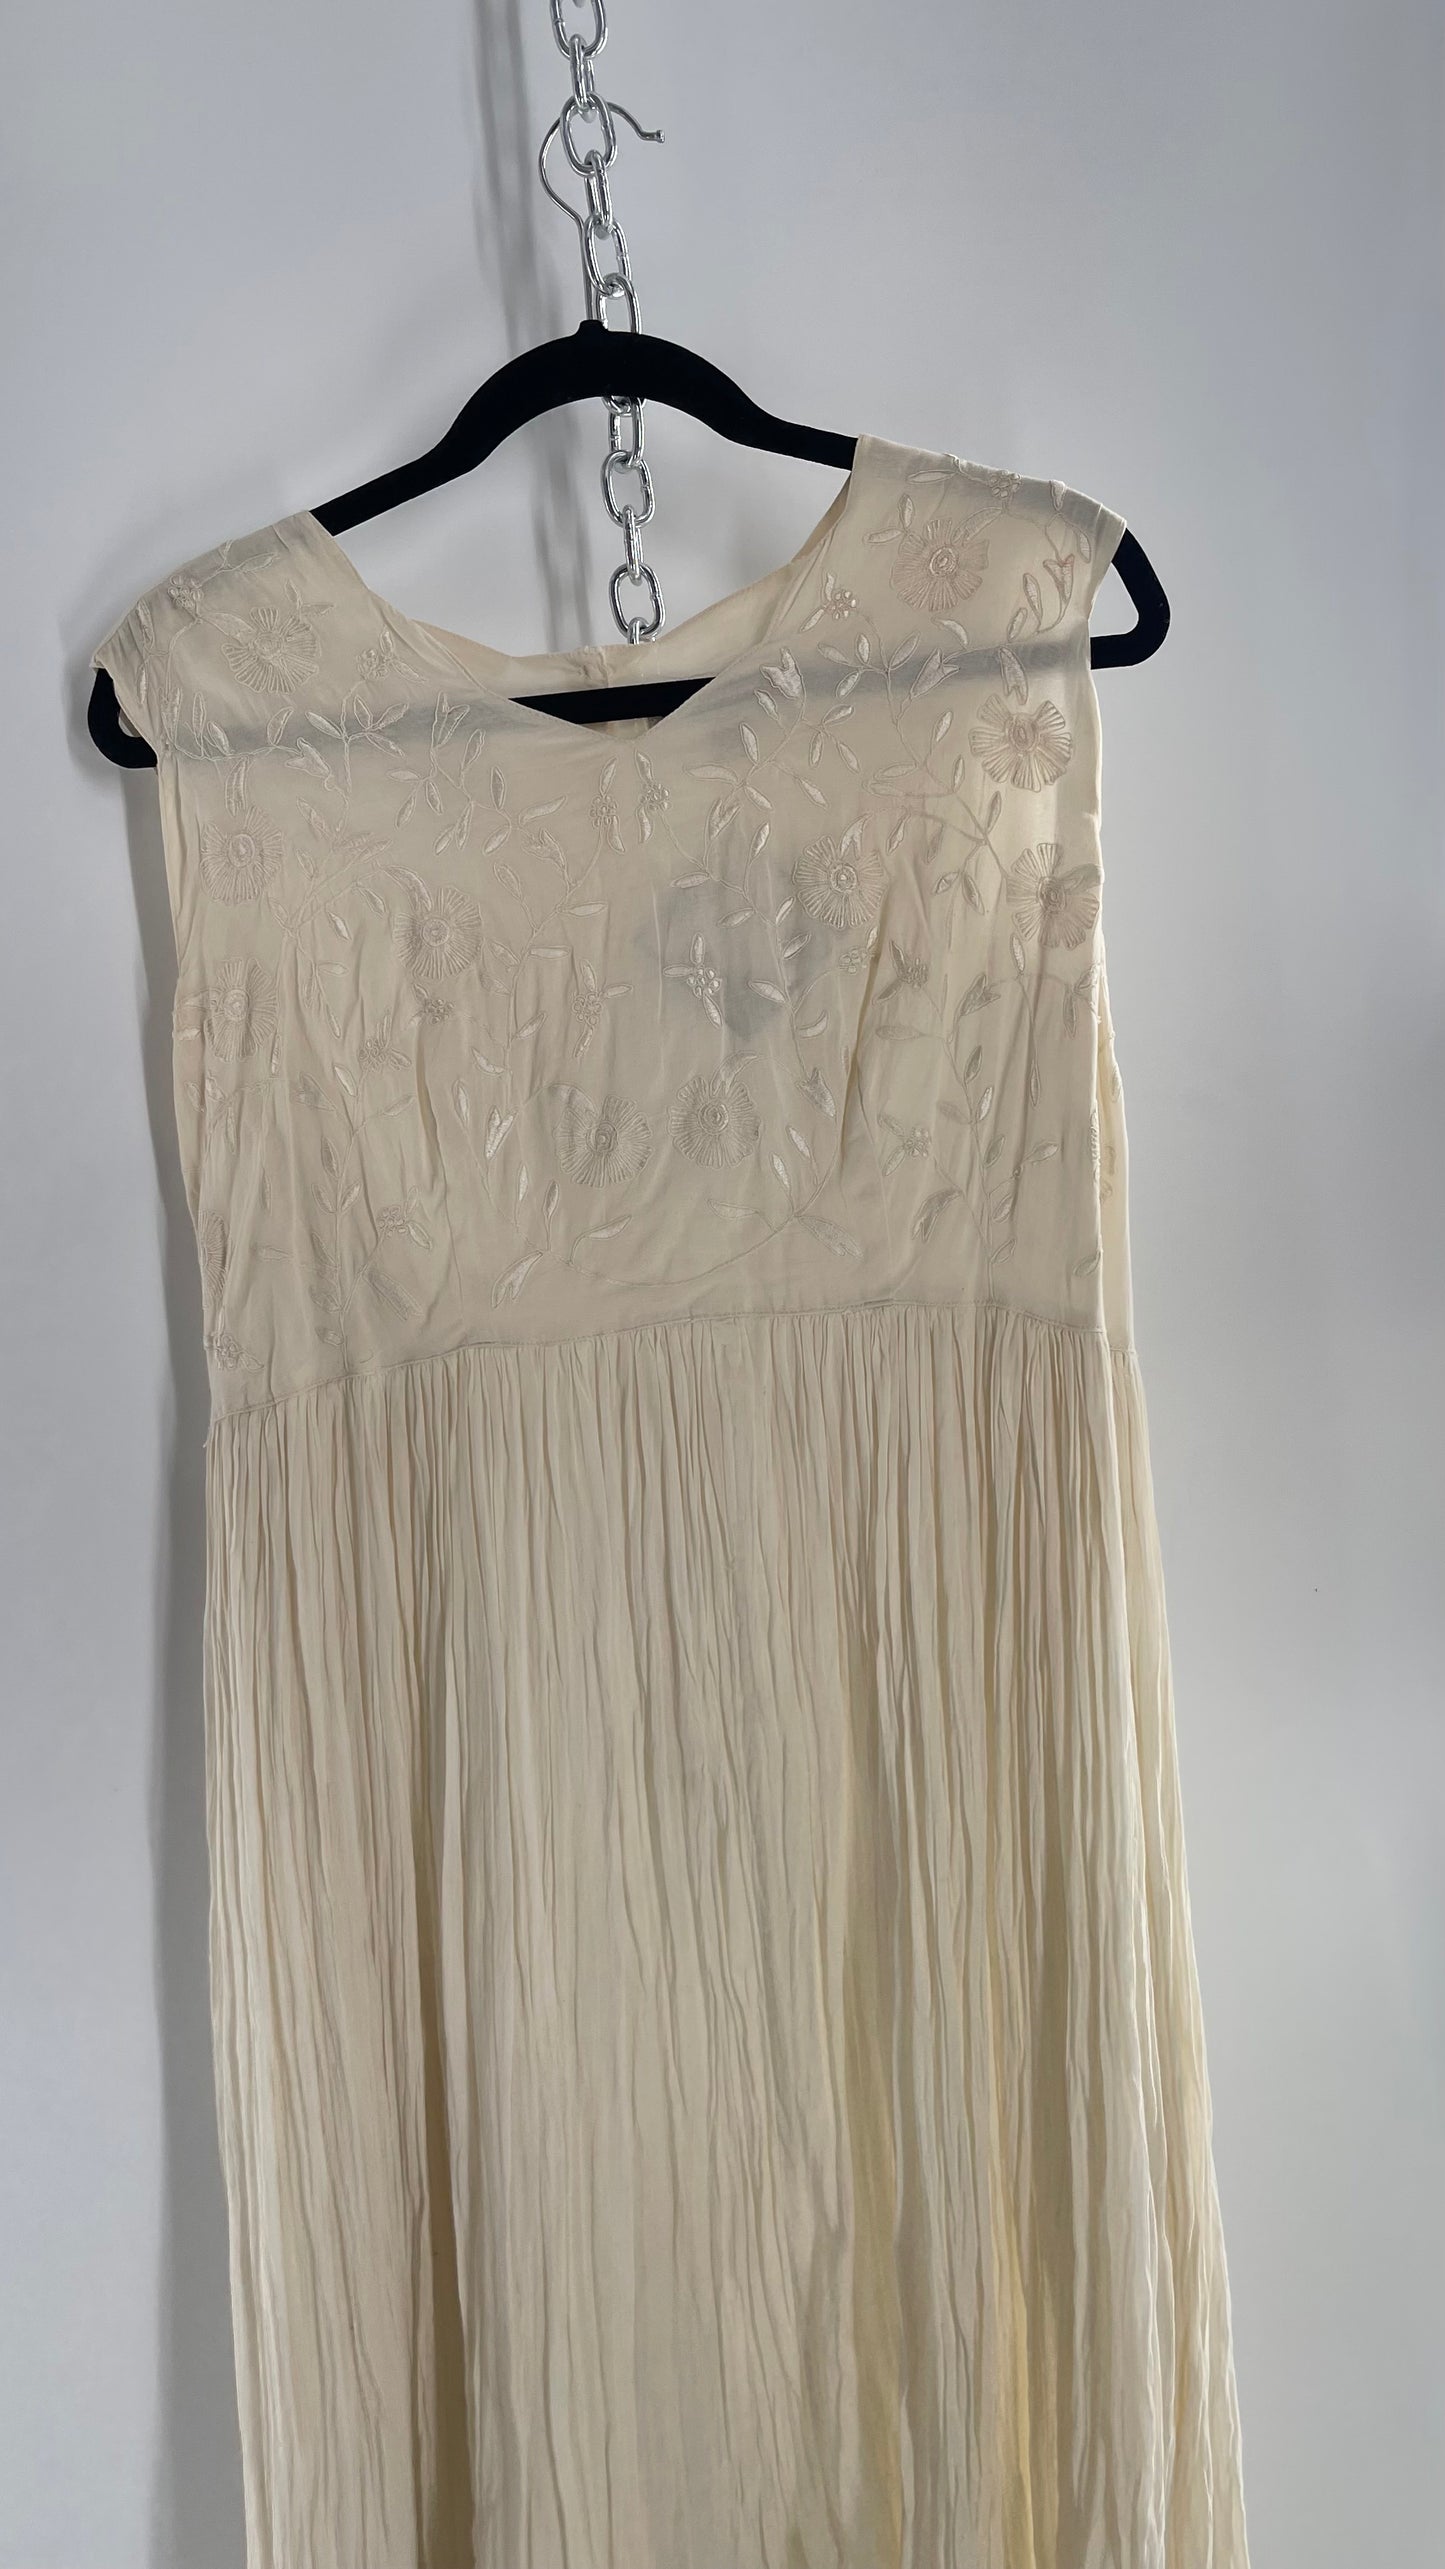 Vintage Made in India 1960s/1970s 95% Cotton Off White Karavan Gown with Crimped Body and Embroidered Bust (Large)